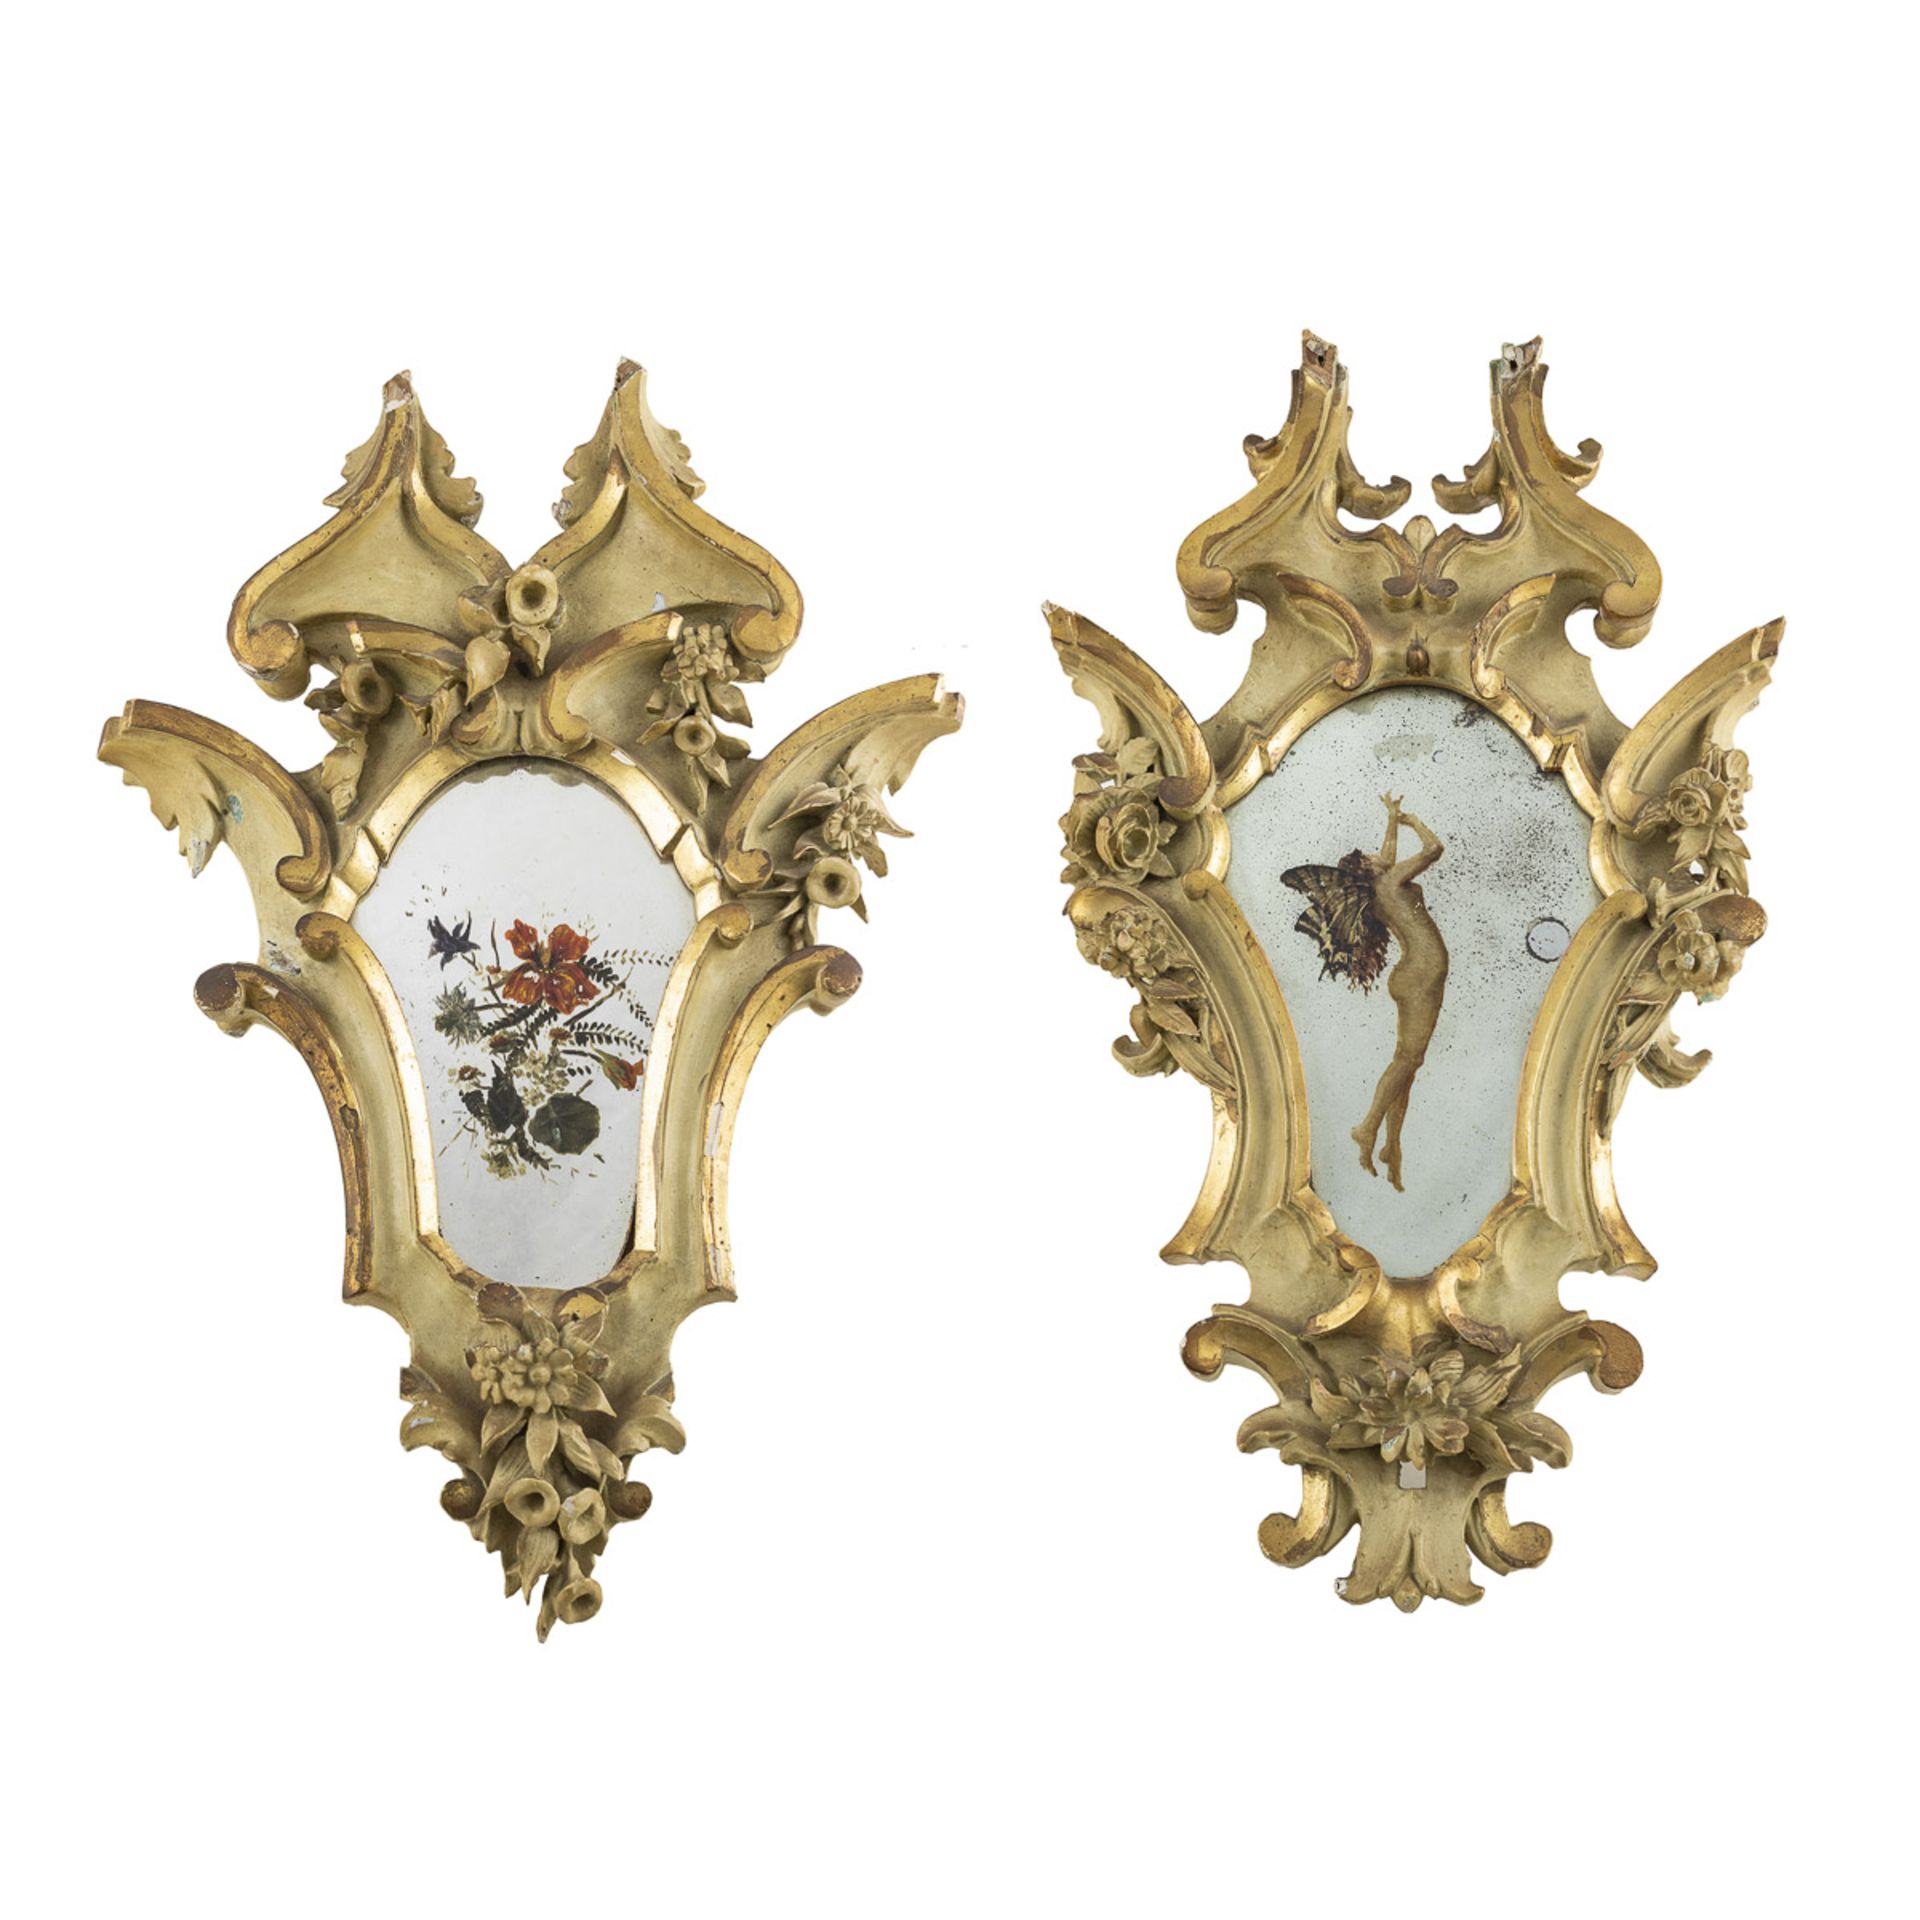 Pair of lacquered and gilded wood mirrors